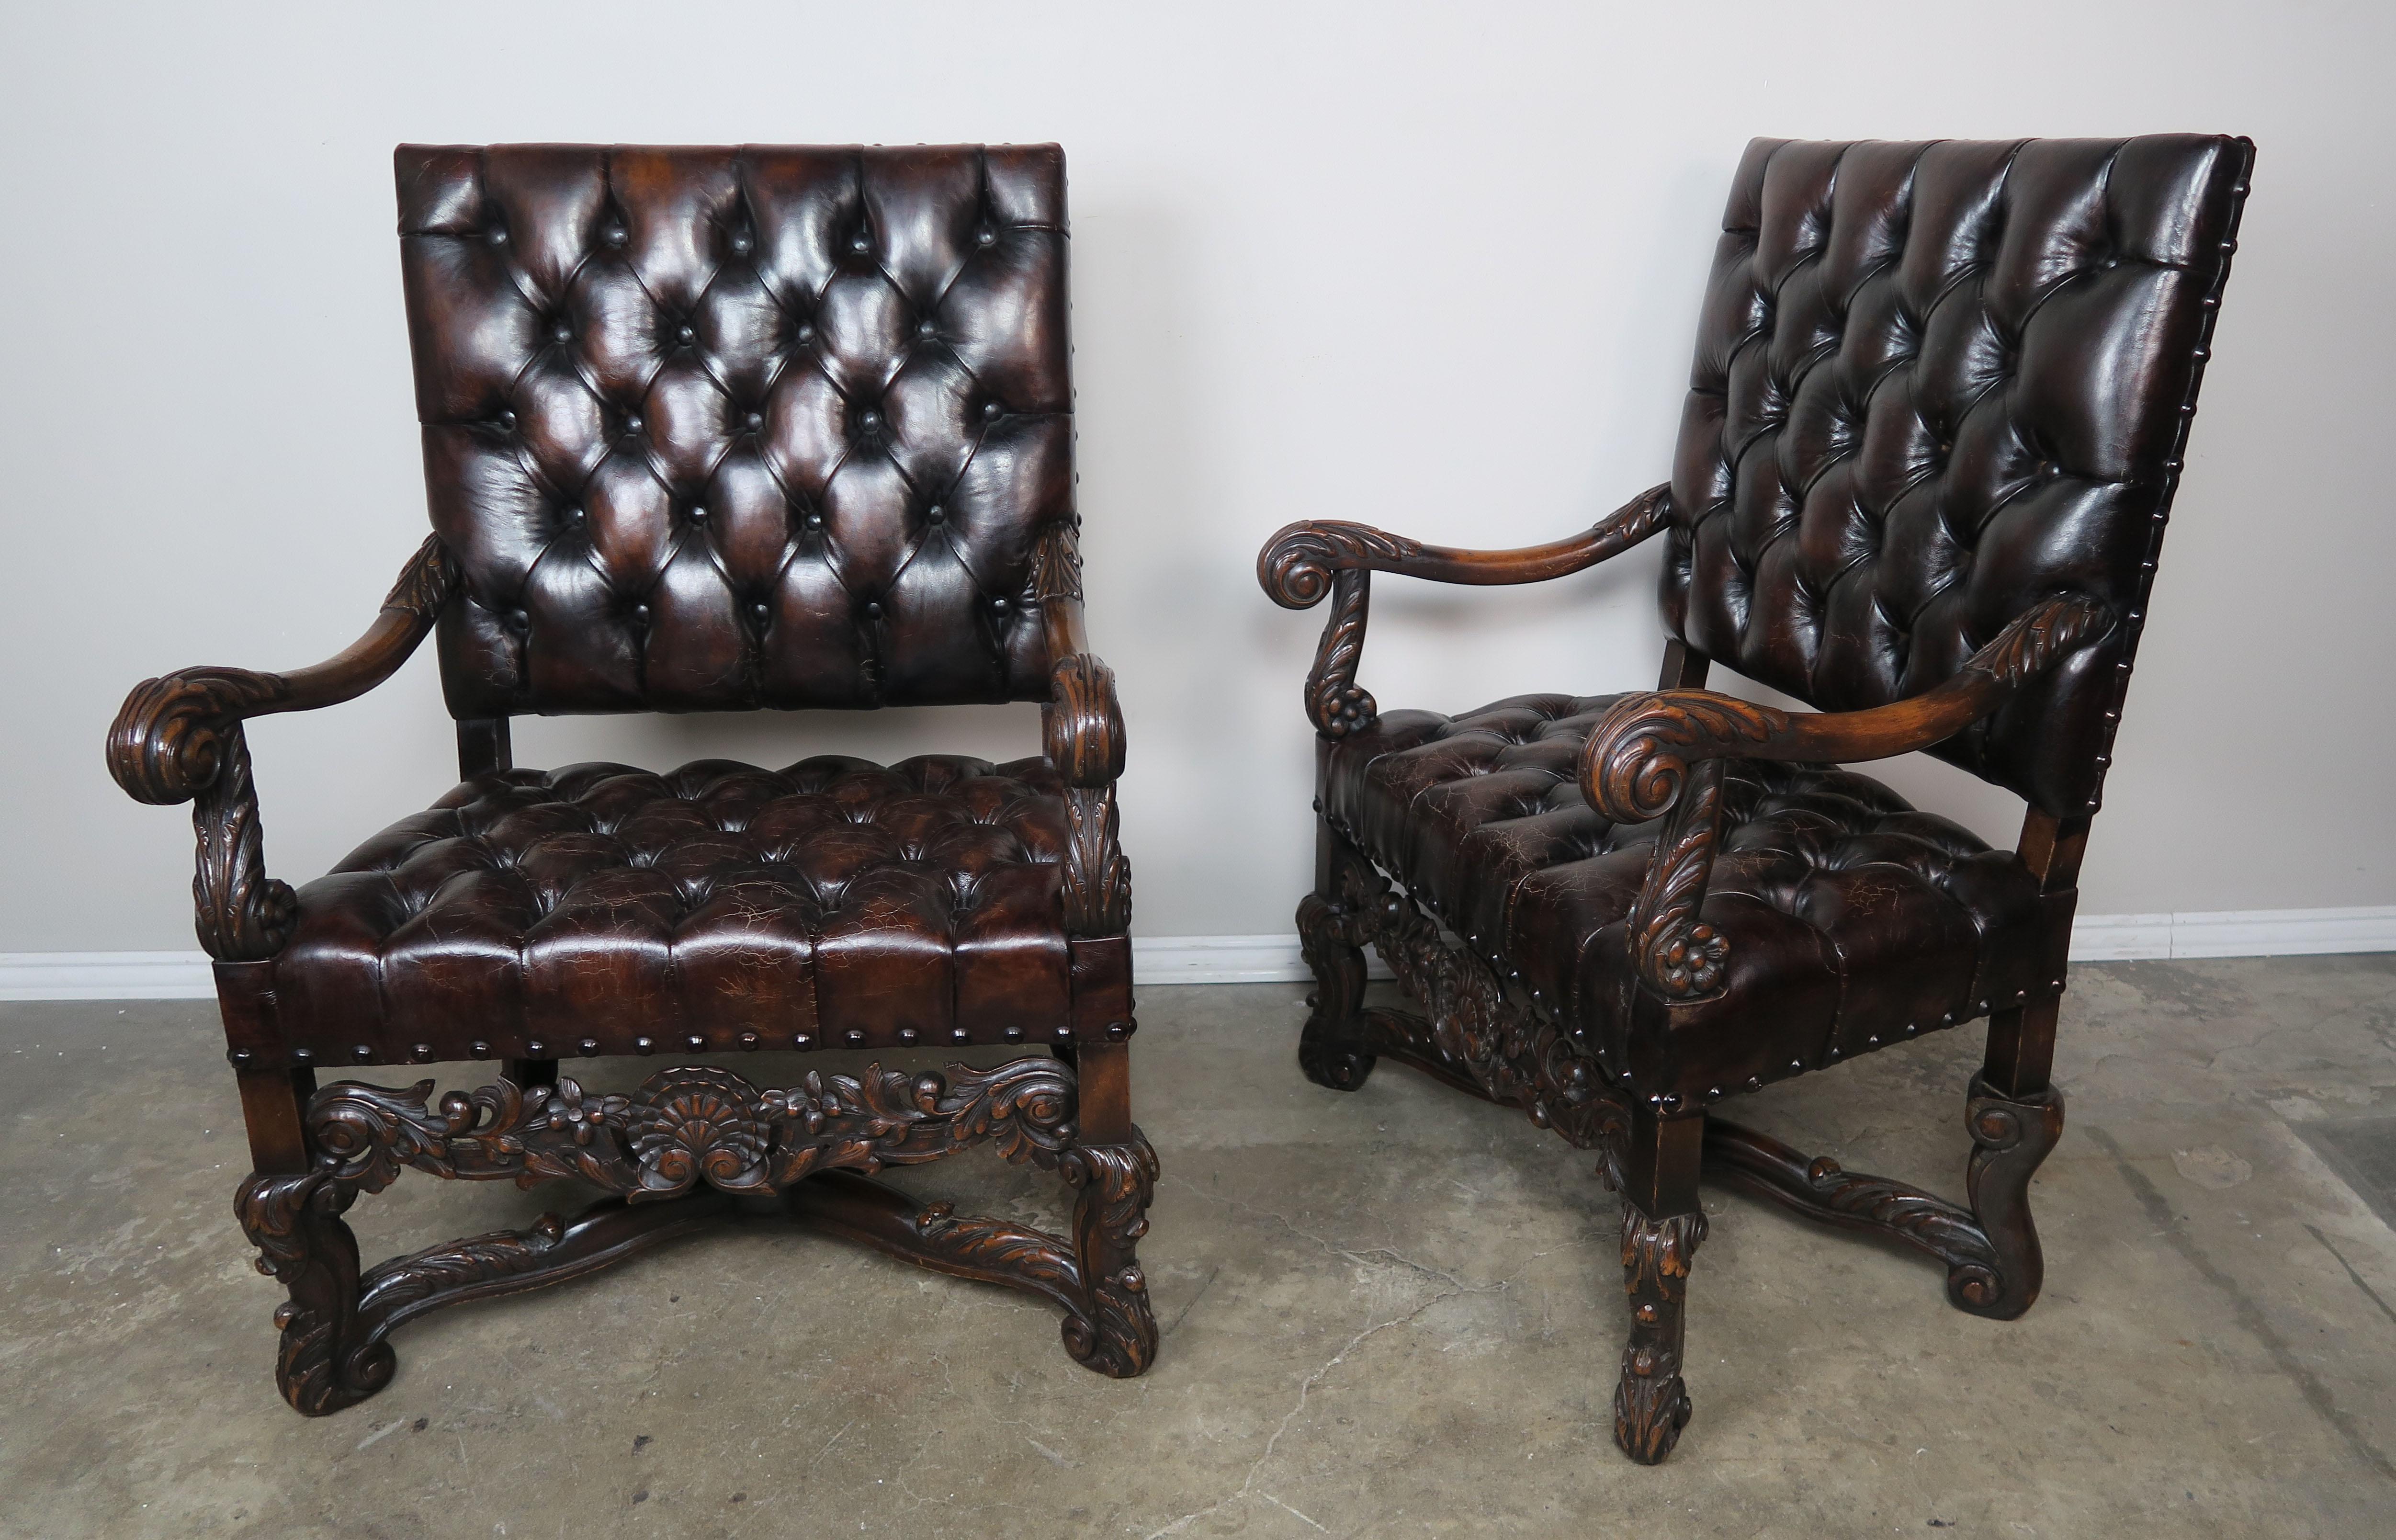 Pair of handsome 19th century walnut carved Italian armchairs upholstered in tufted leather with nailhead trim detail. Beautiful carved details throughout including a shell motif flanked by swirling acanthus leaves. The chairs stand on four carved